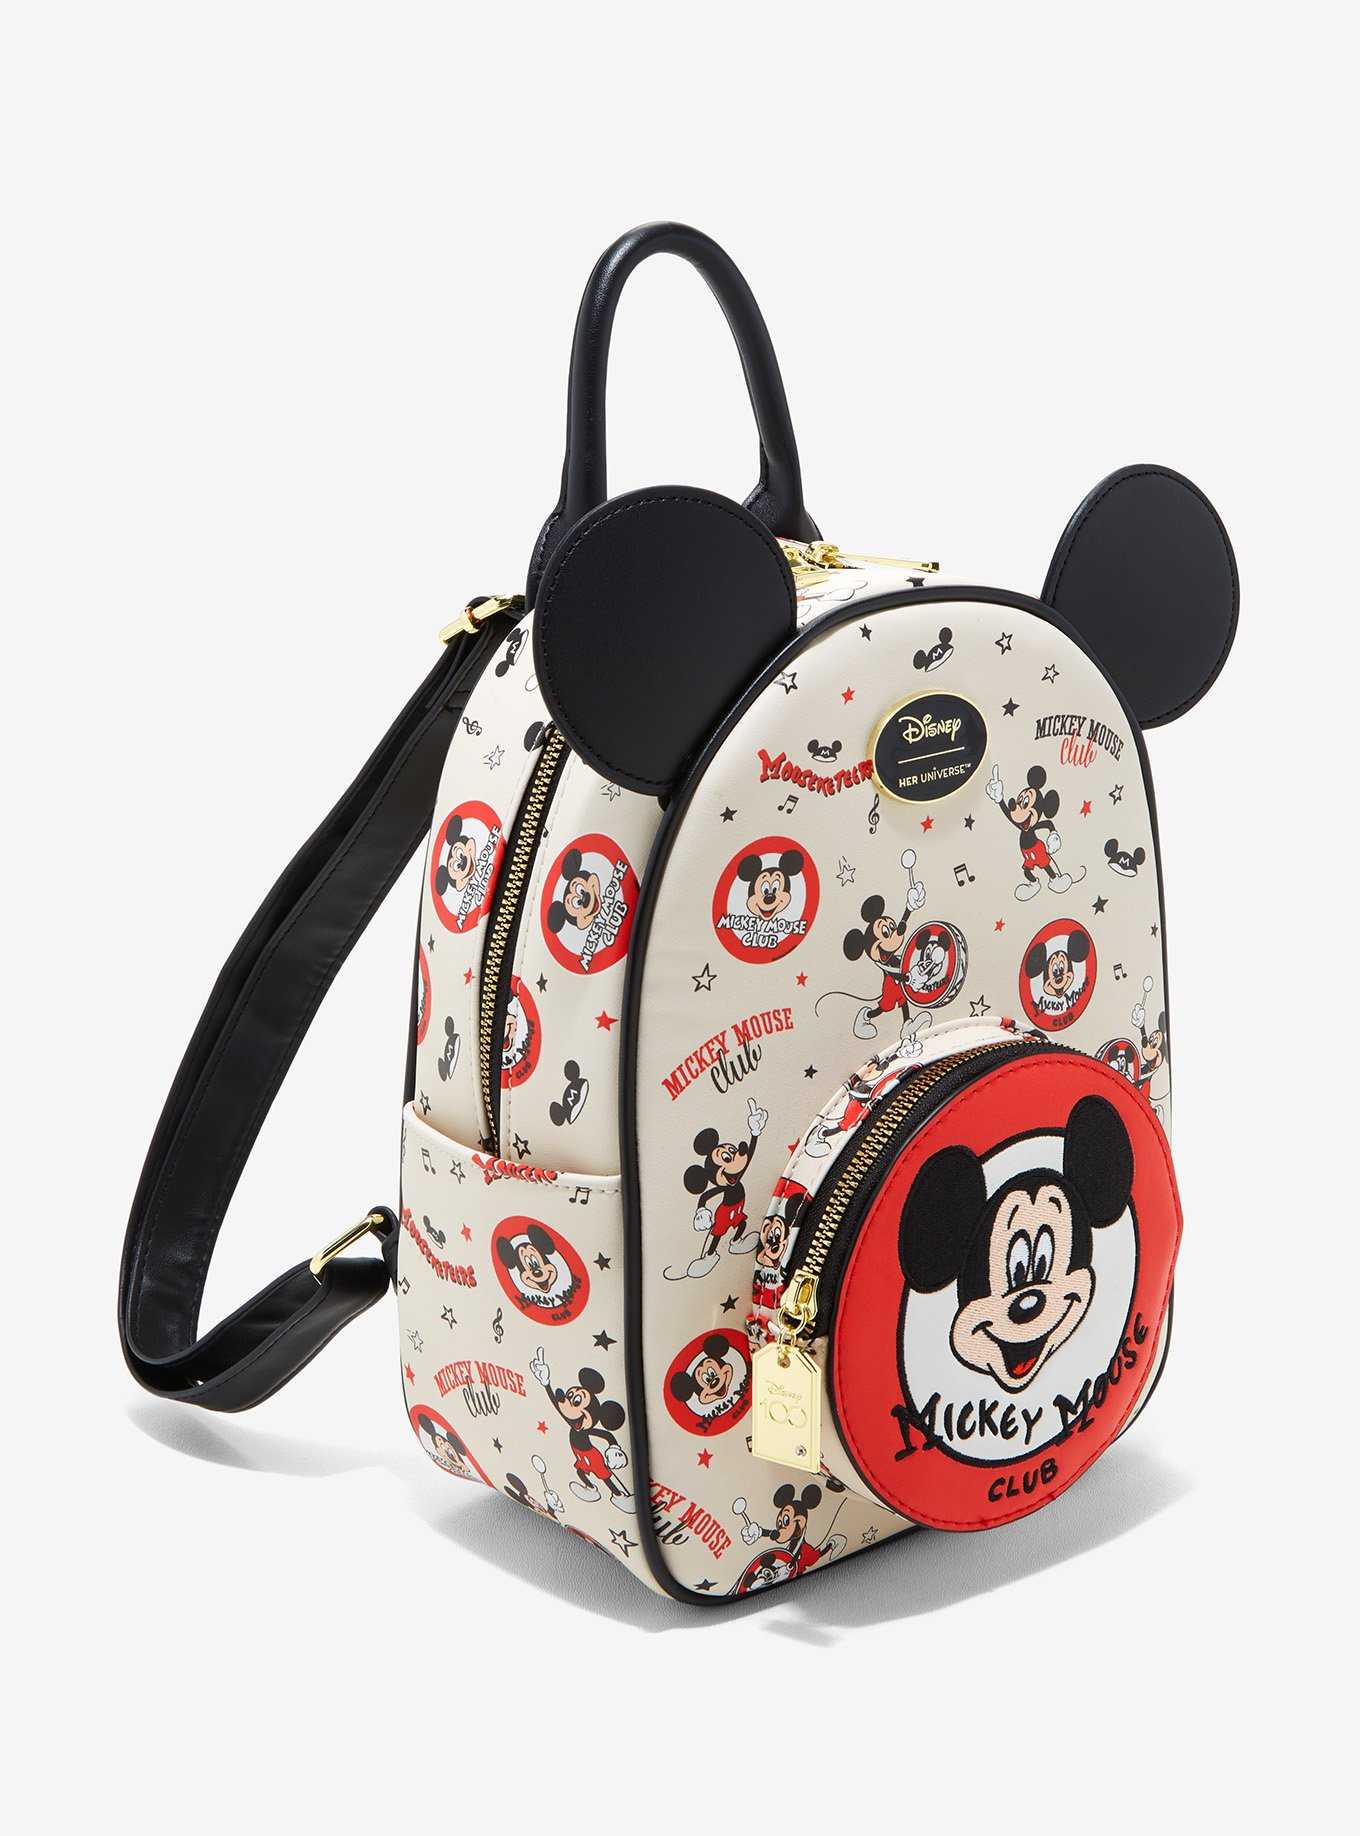 Her Universe Disney100 Mickey Mouse Club Vintage Mini Backpack, , hi-res